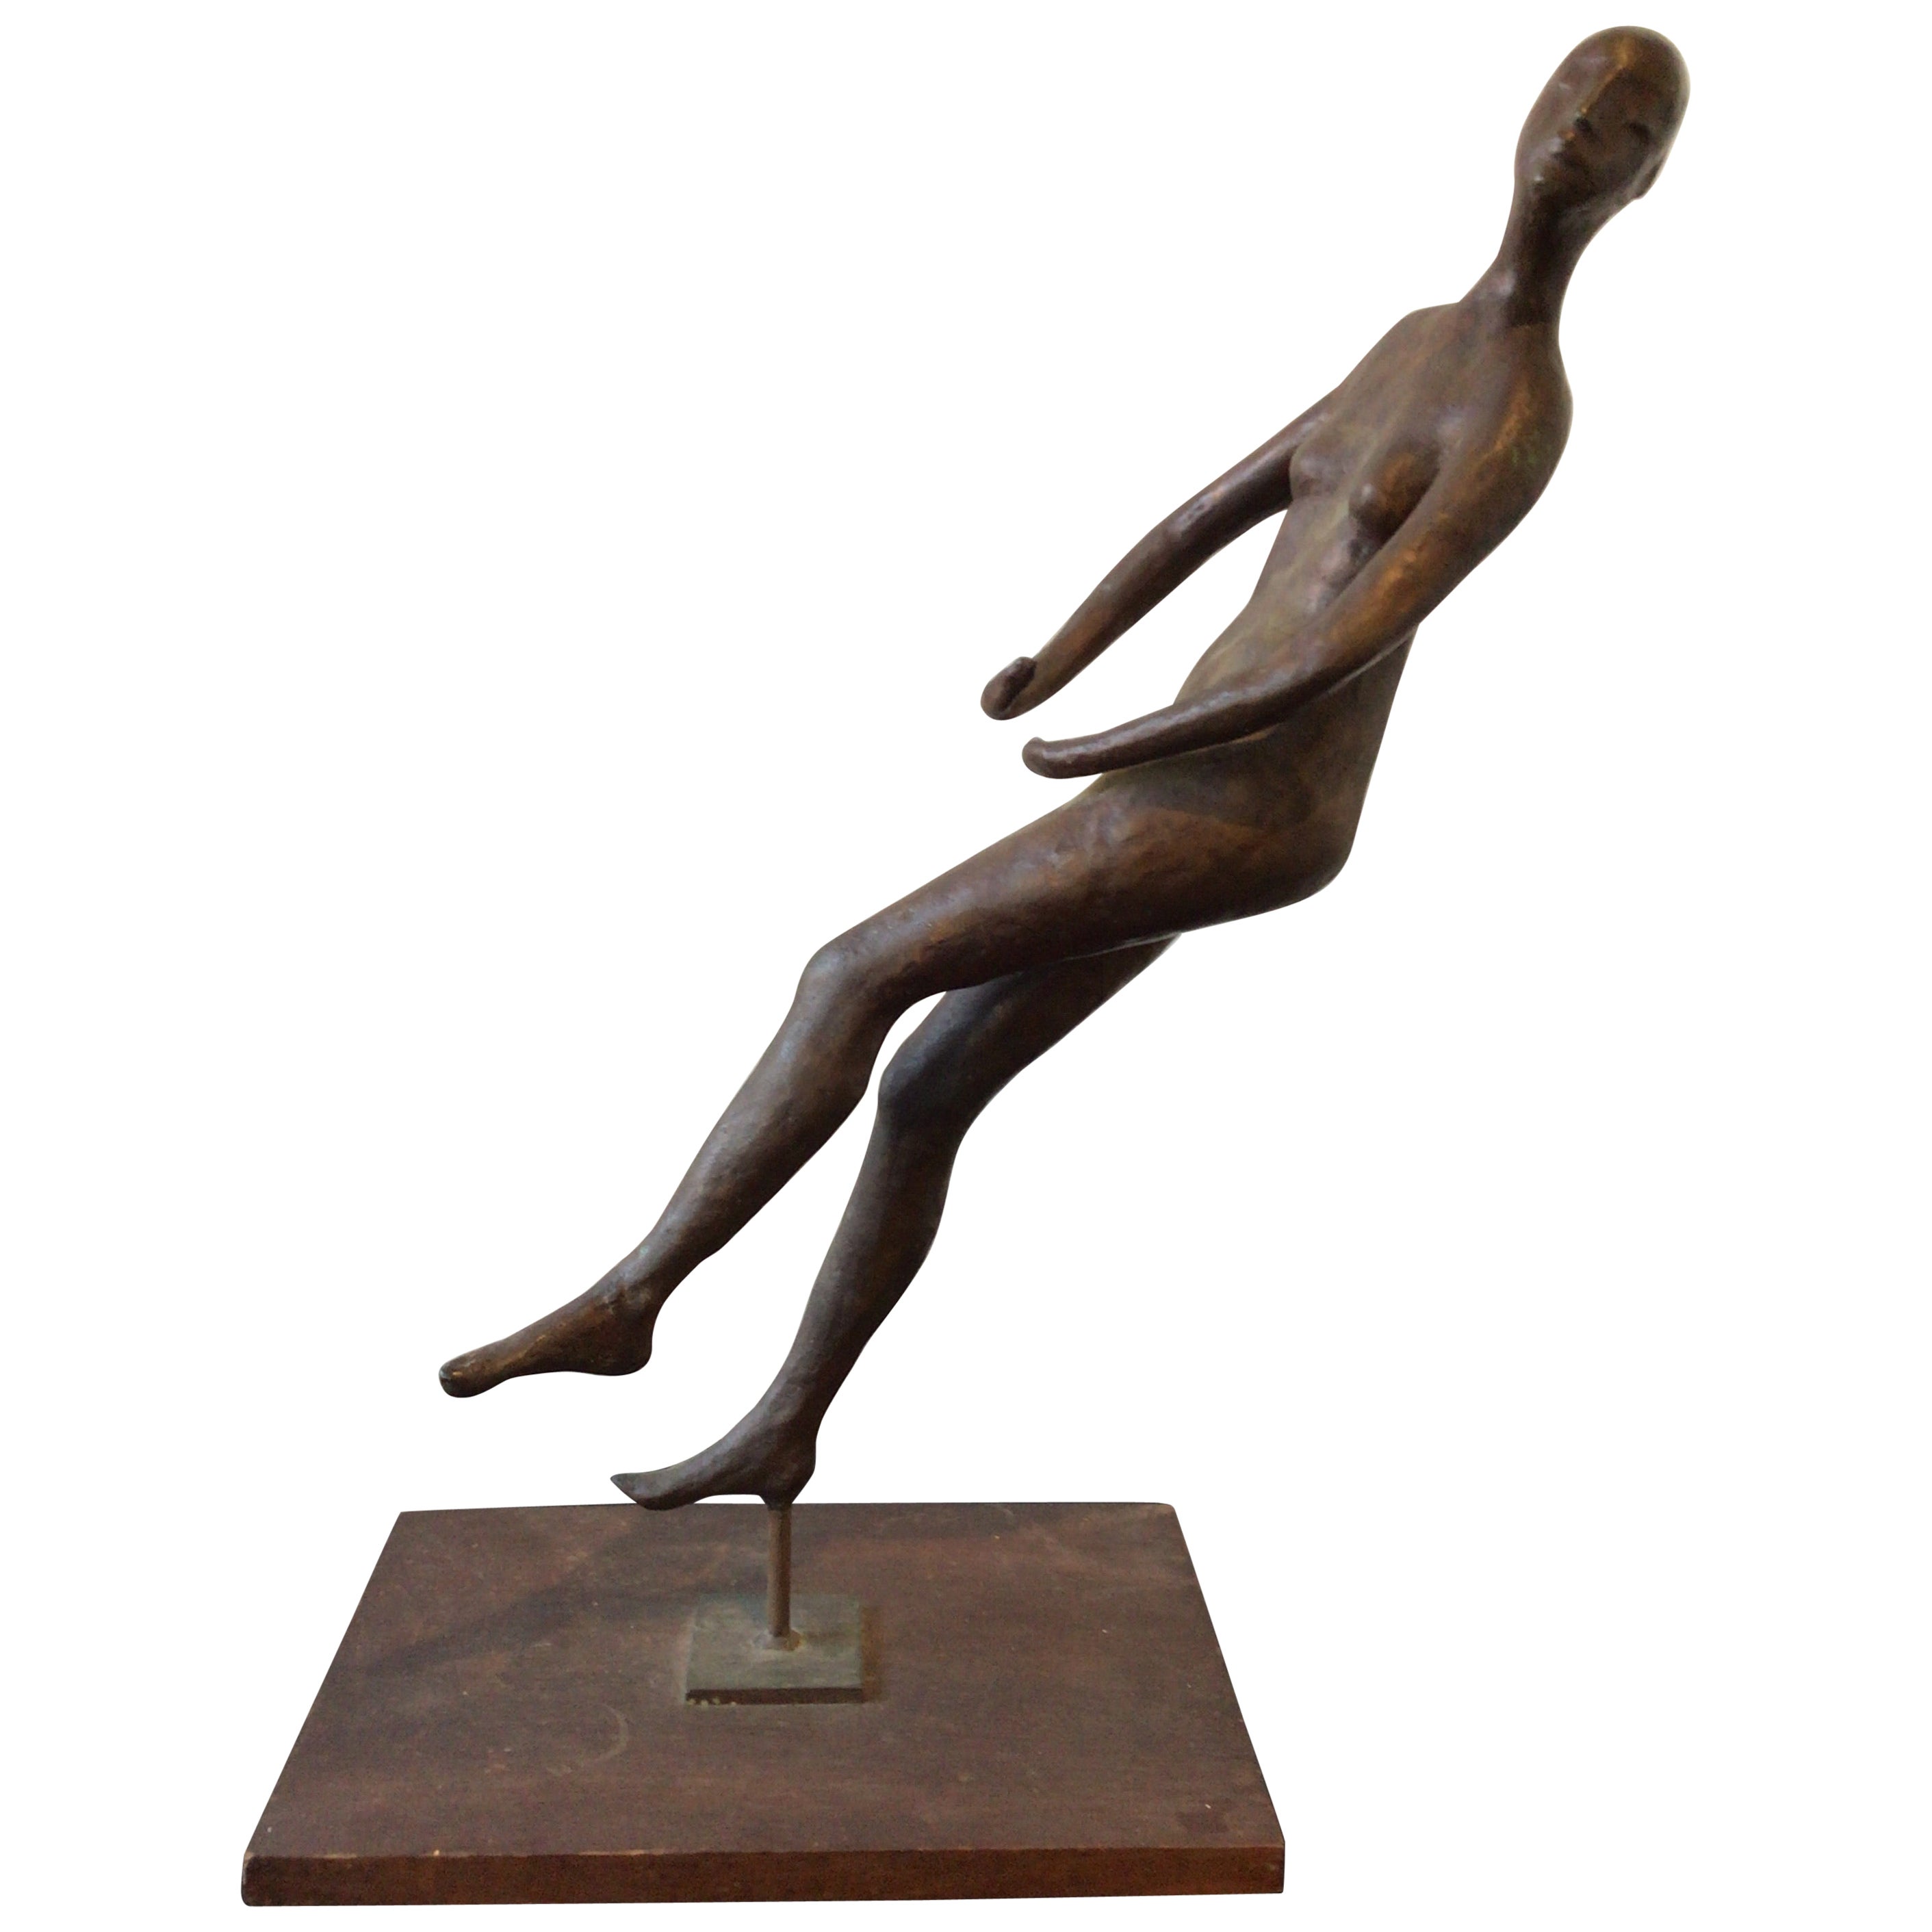 1950s Bronze Sculpture of Nude Woman on Wood Base